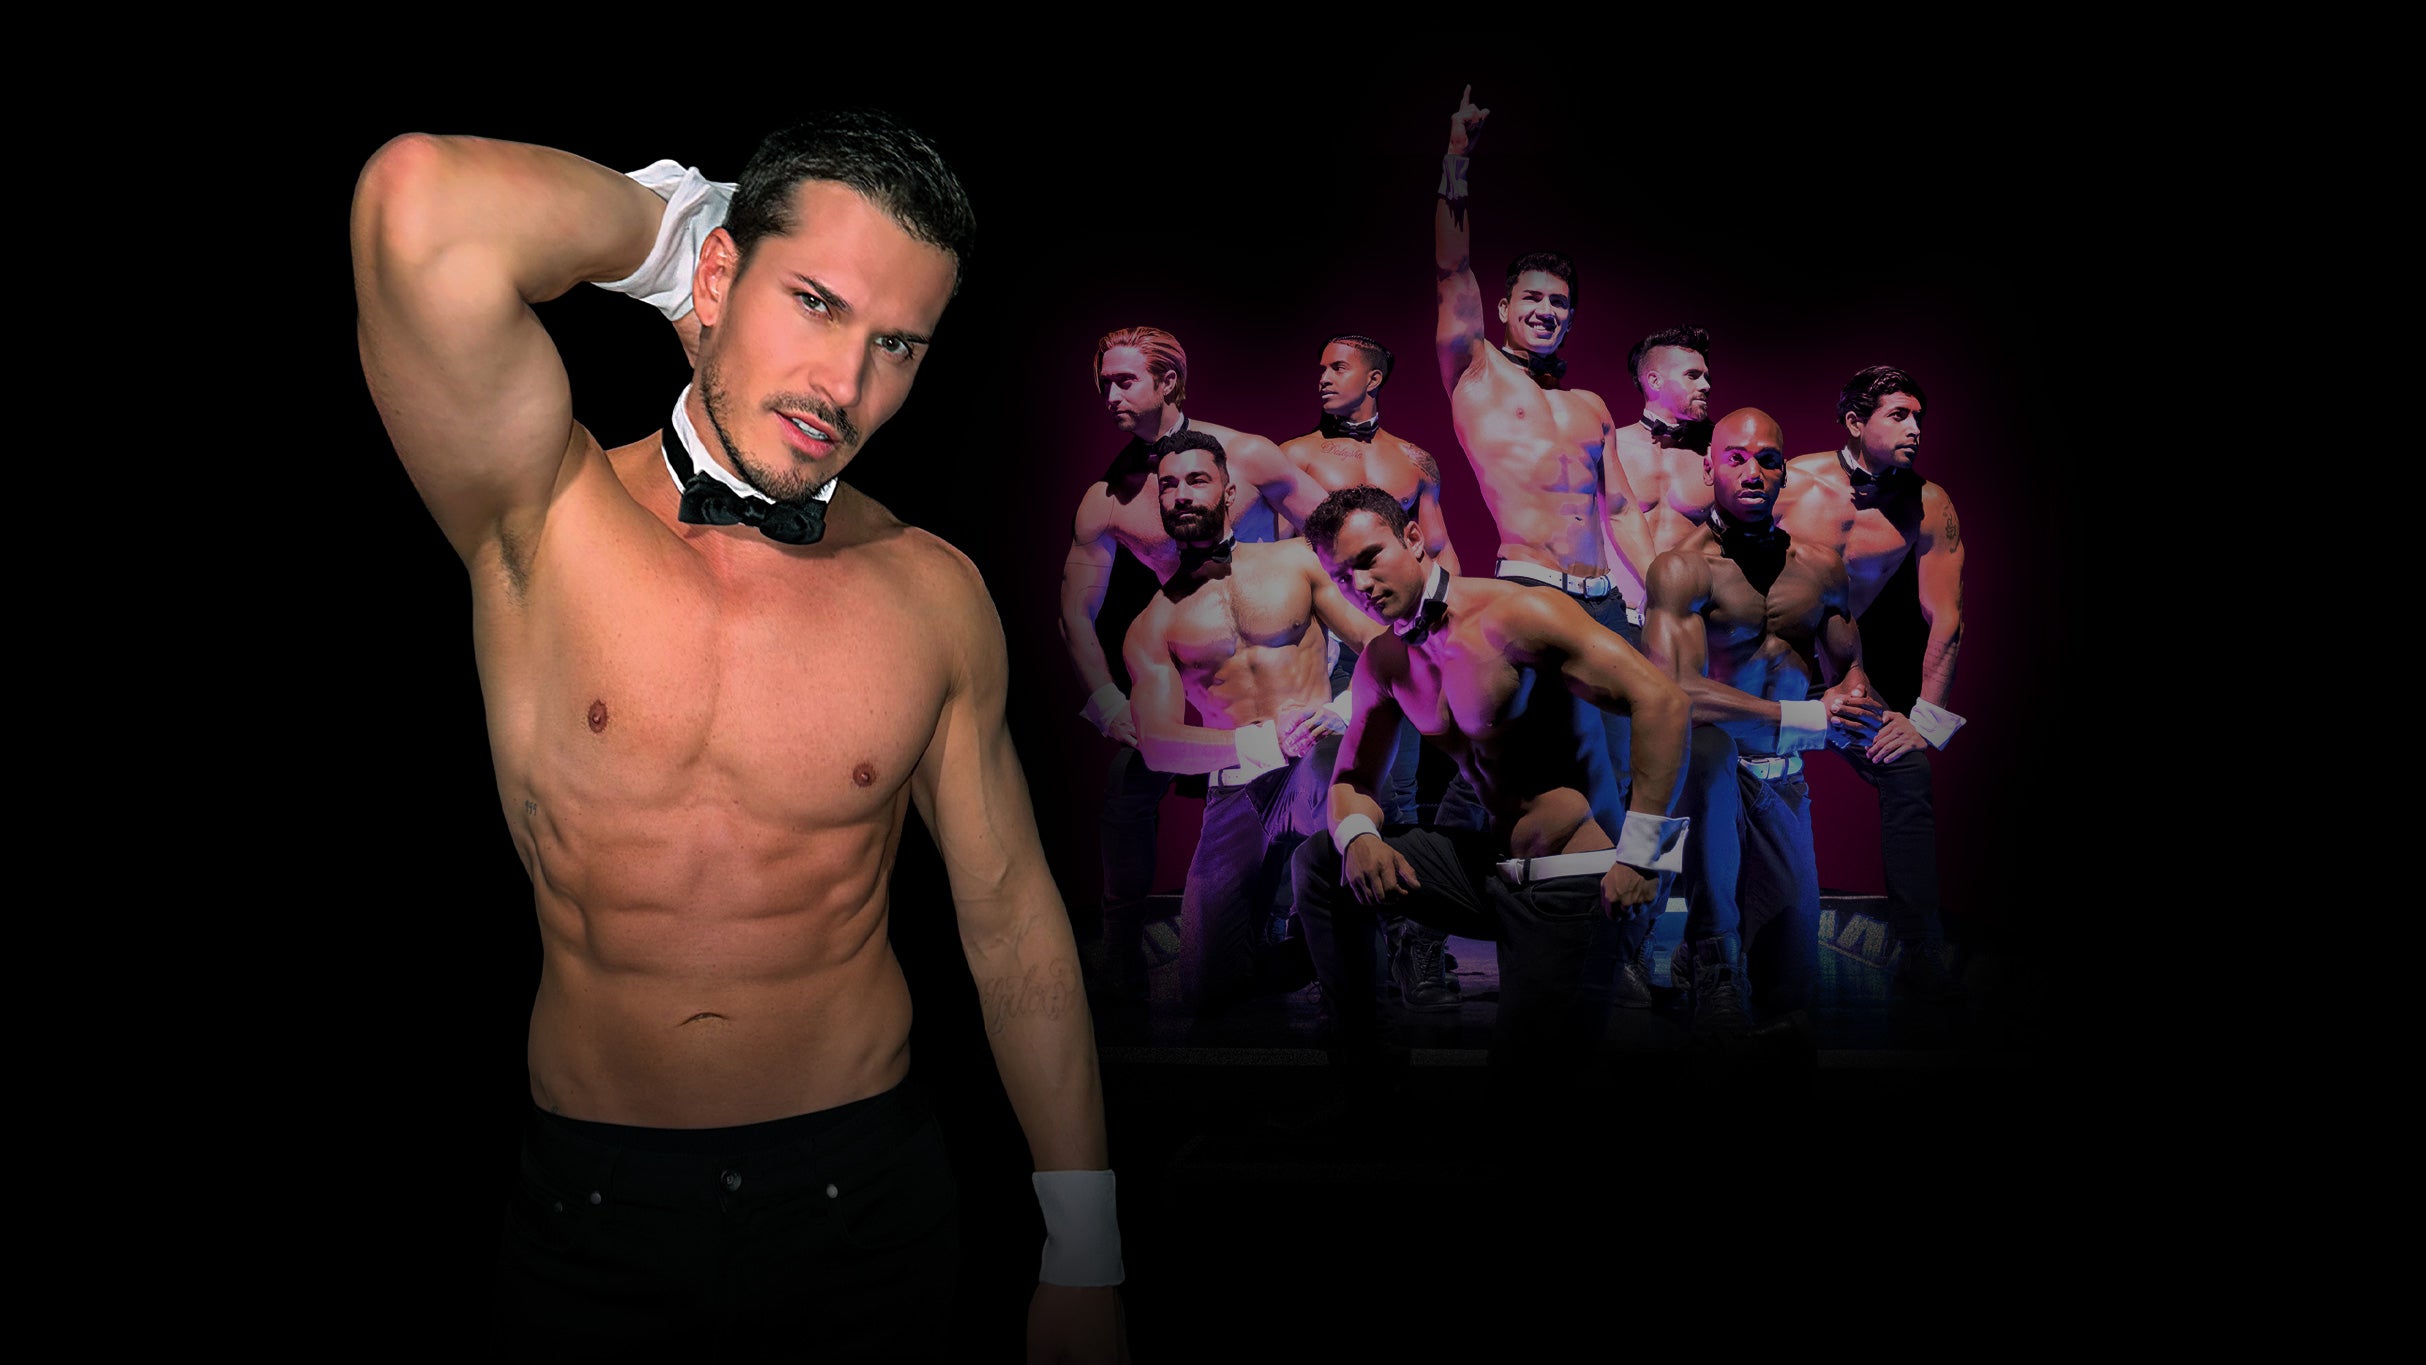 Chippendales at Chippendales Theater at Rio Las Vegas